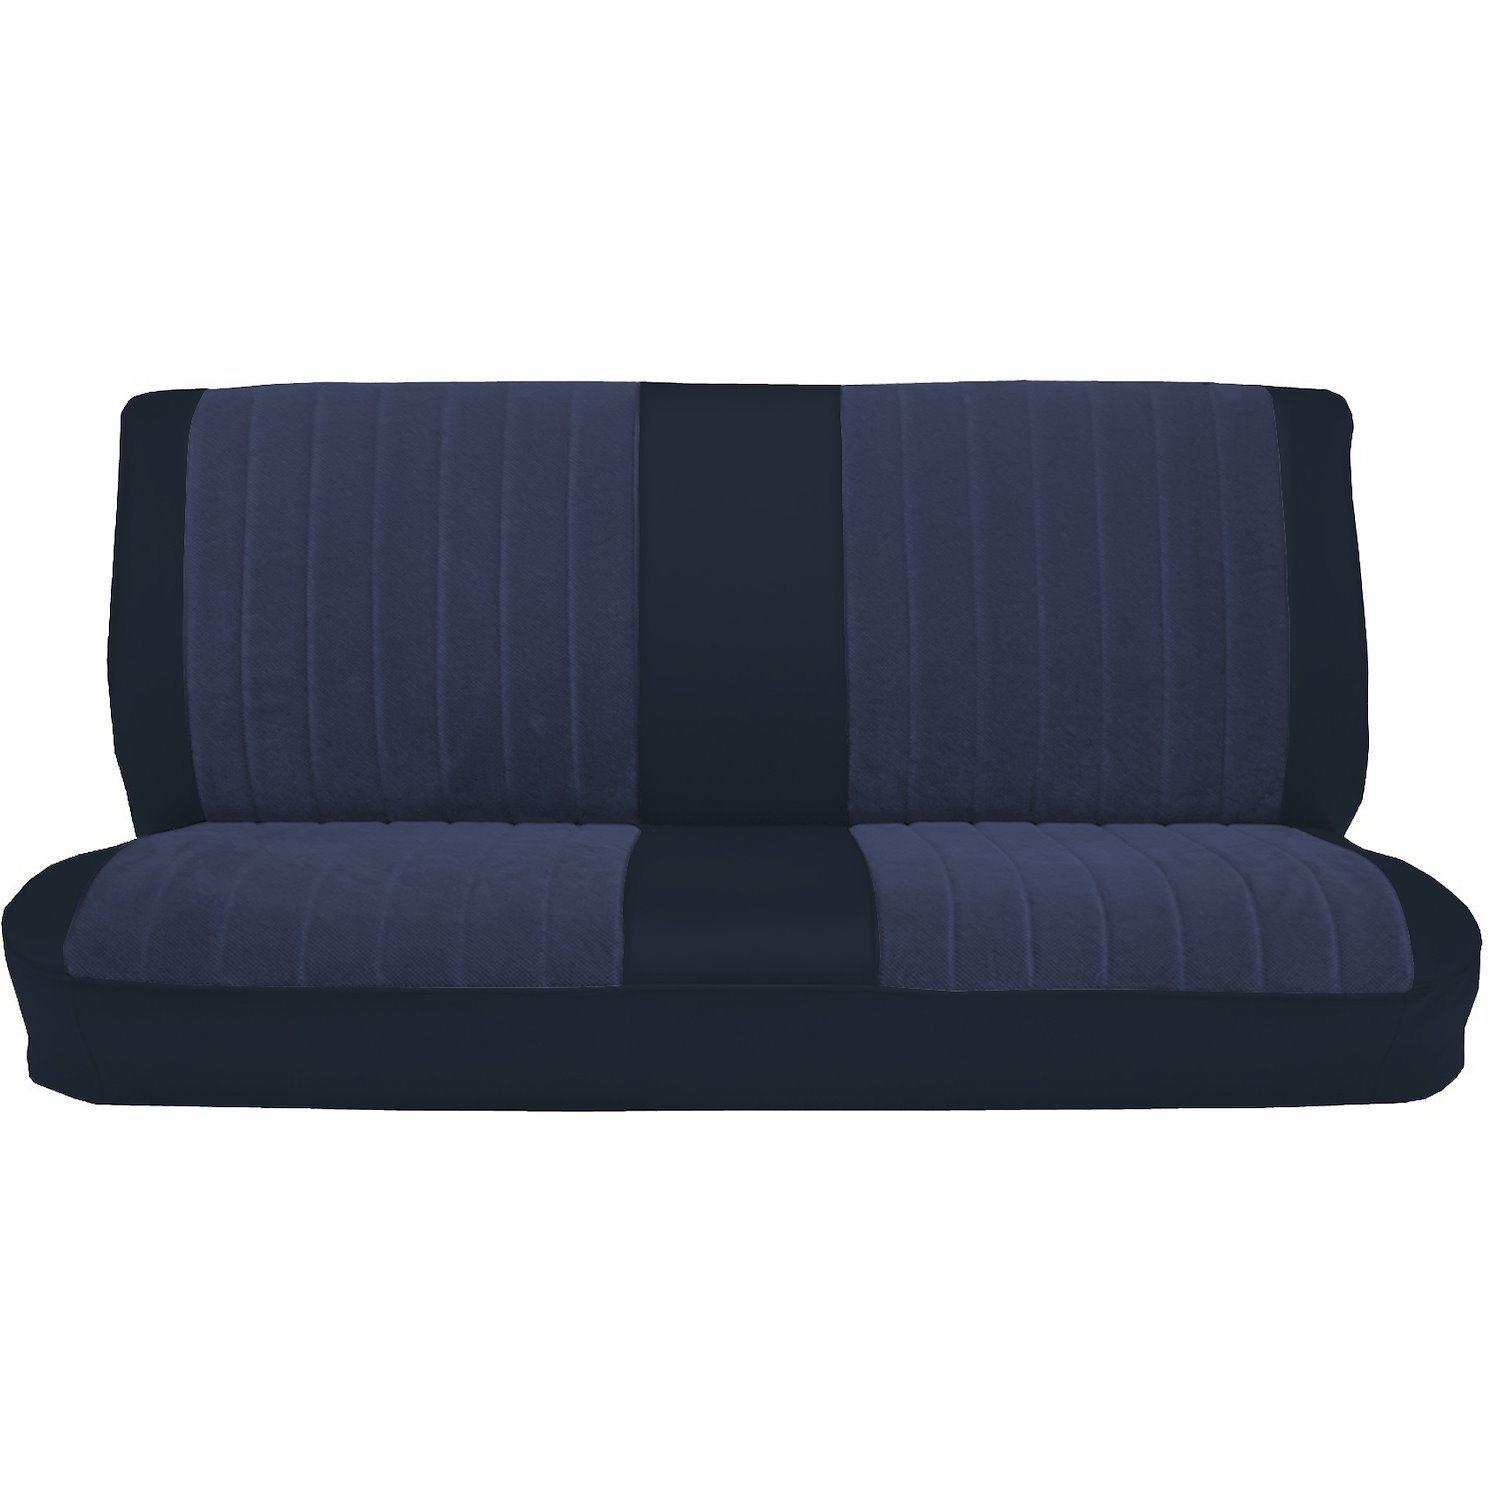 Seat Upholstery Kit 1981-1987 Chevy/GMC Full Size Truck - Standard Cab - Navy Blue Cloth